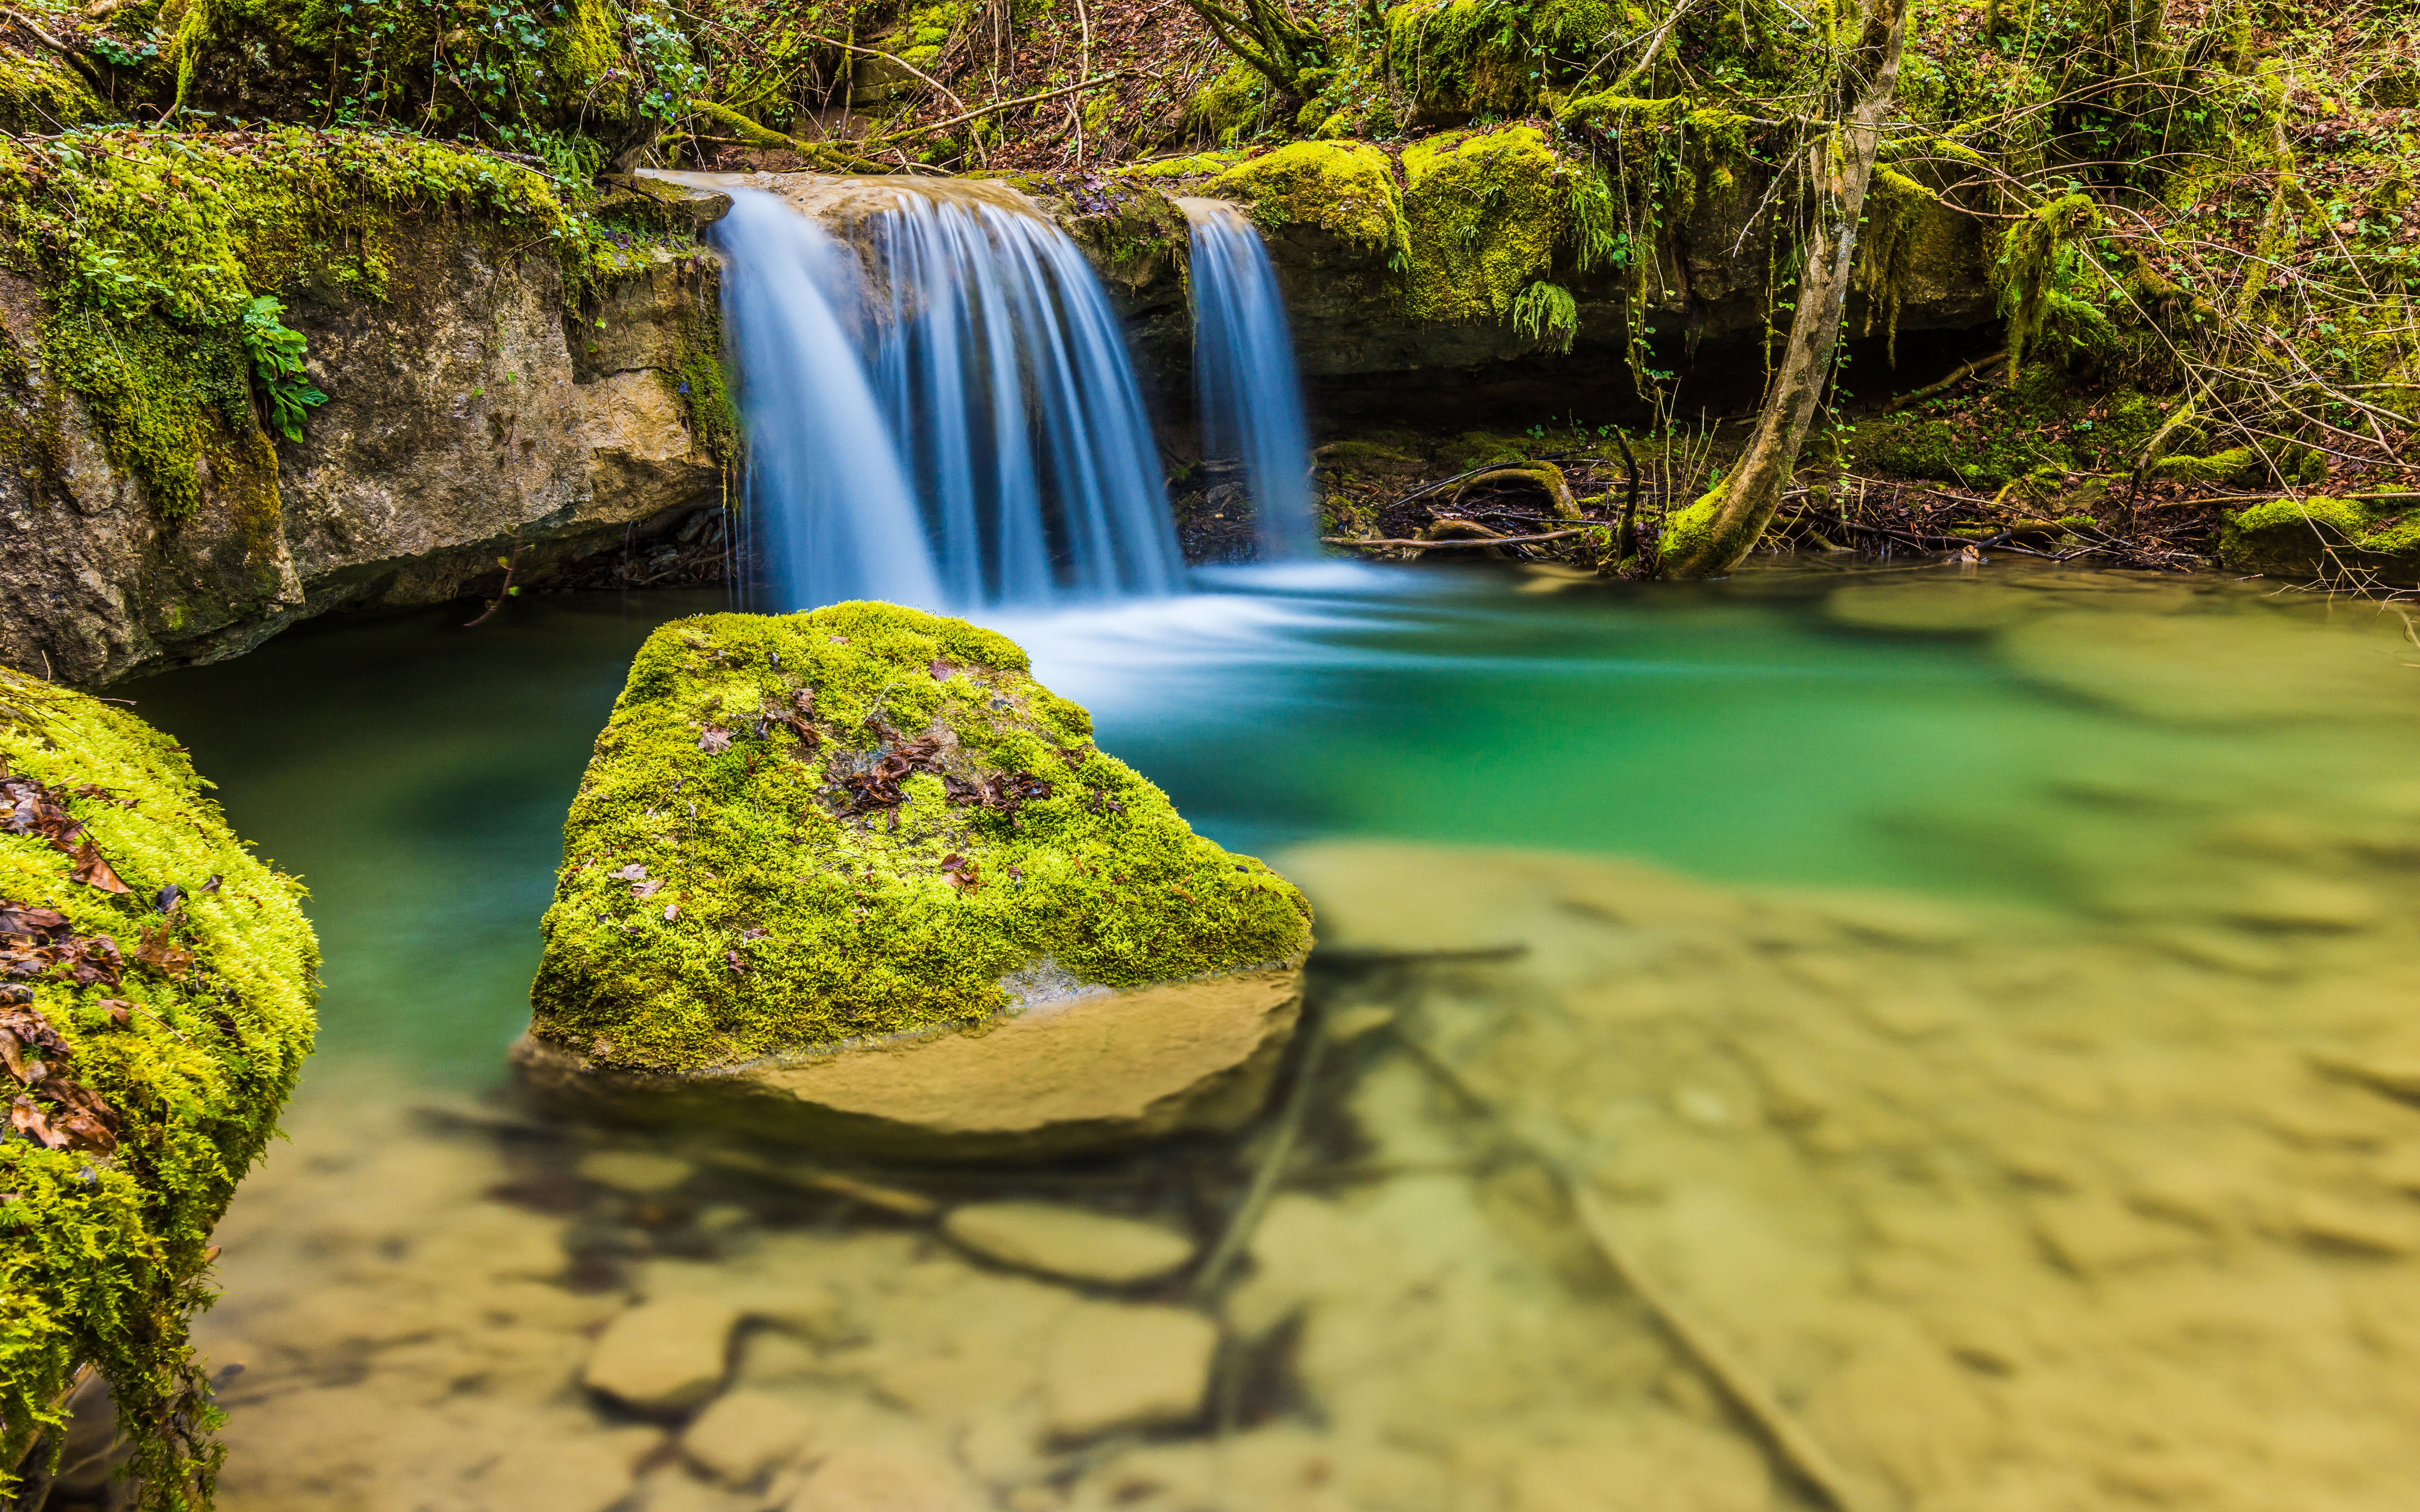 Nice Small Waterfall Clear Water, Rocks With Moss Hd Wallpapers For Mobile Phones And Laptops